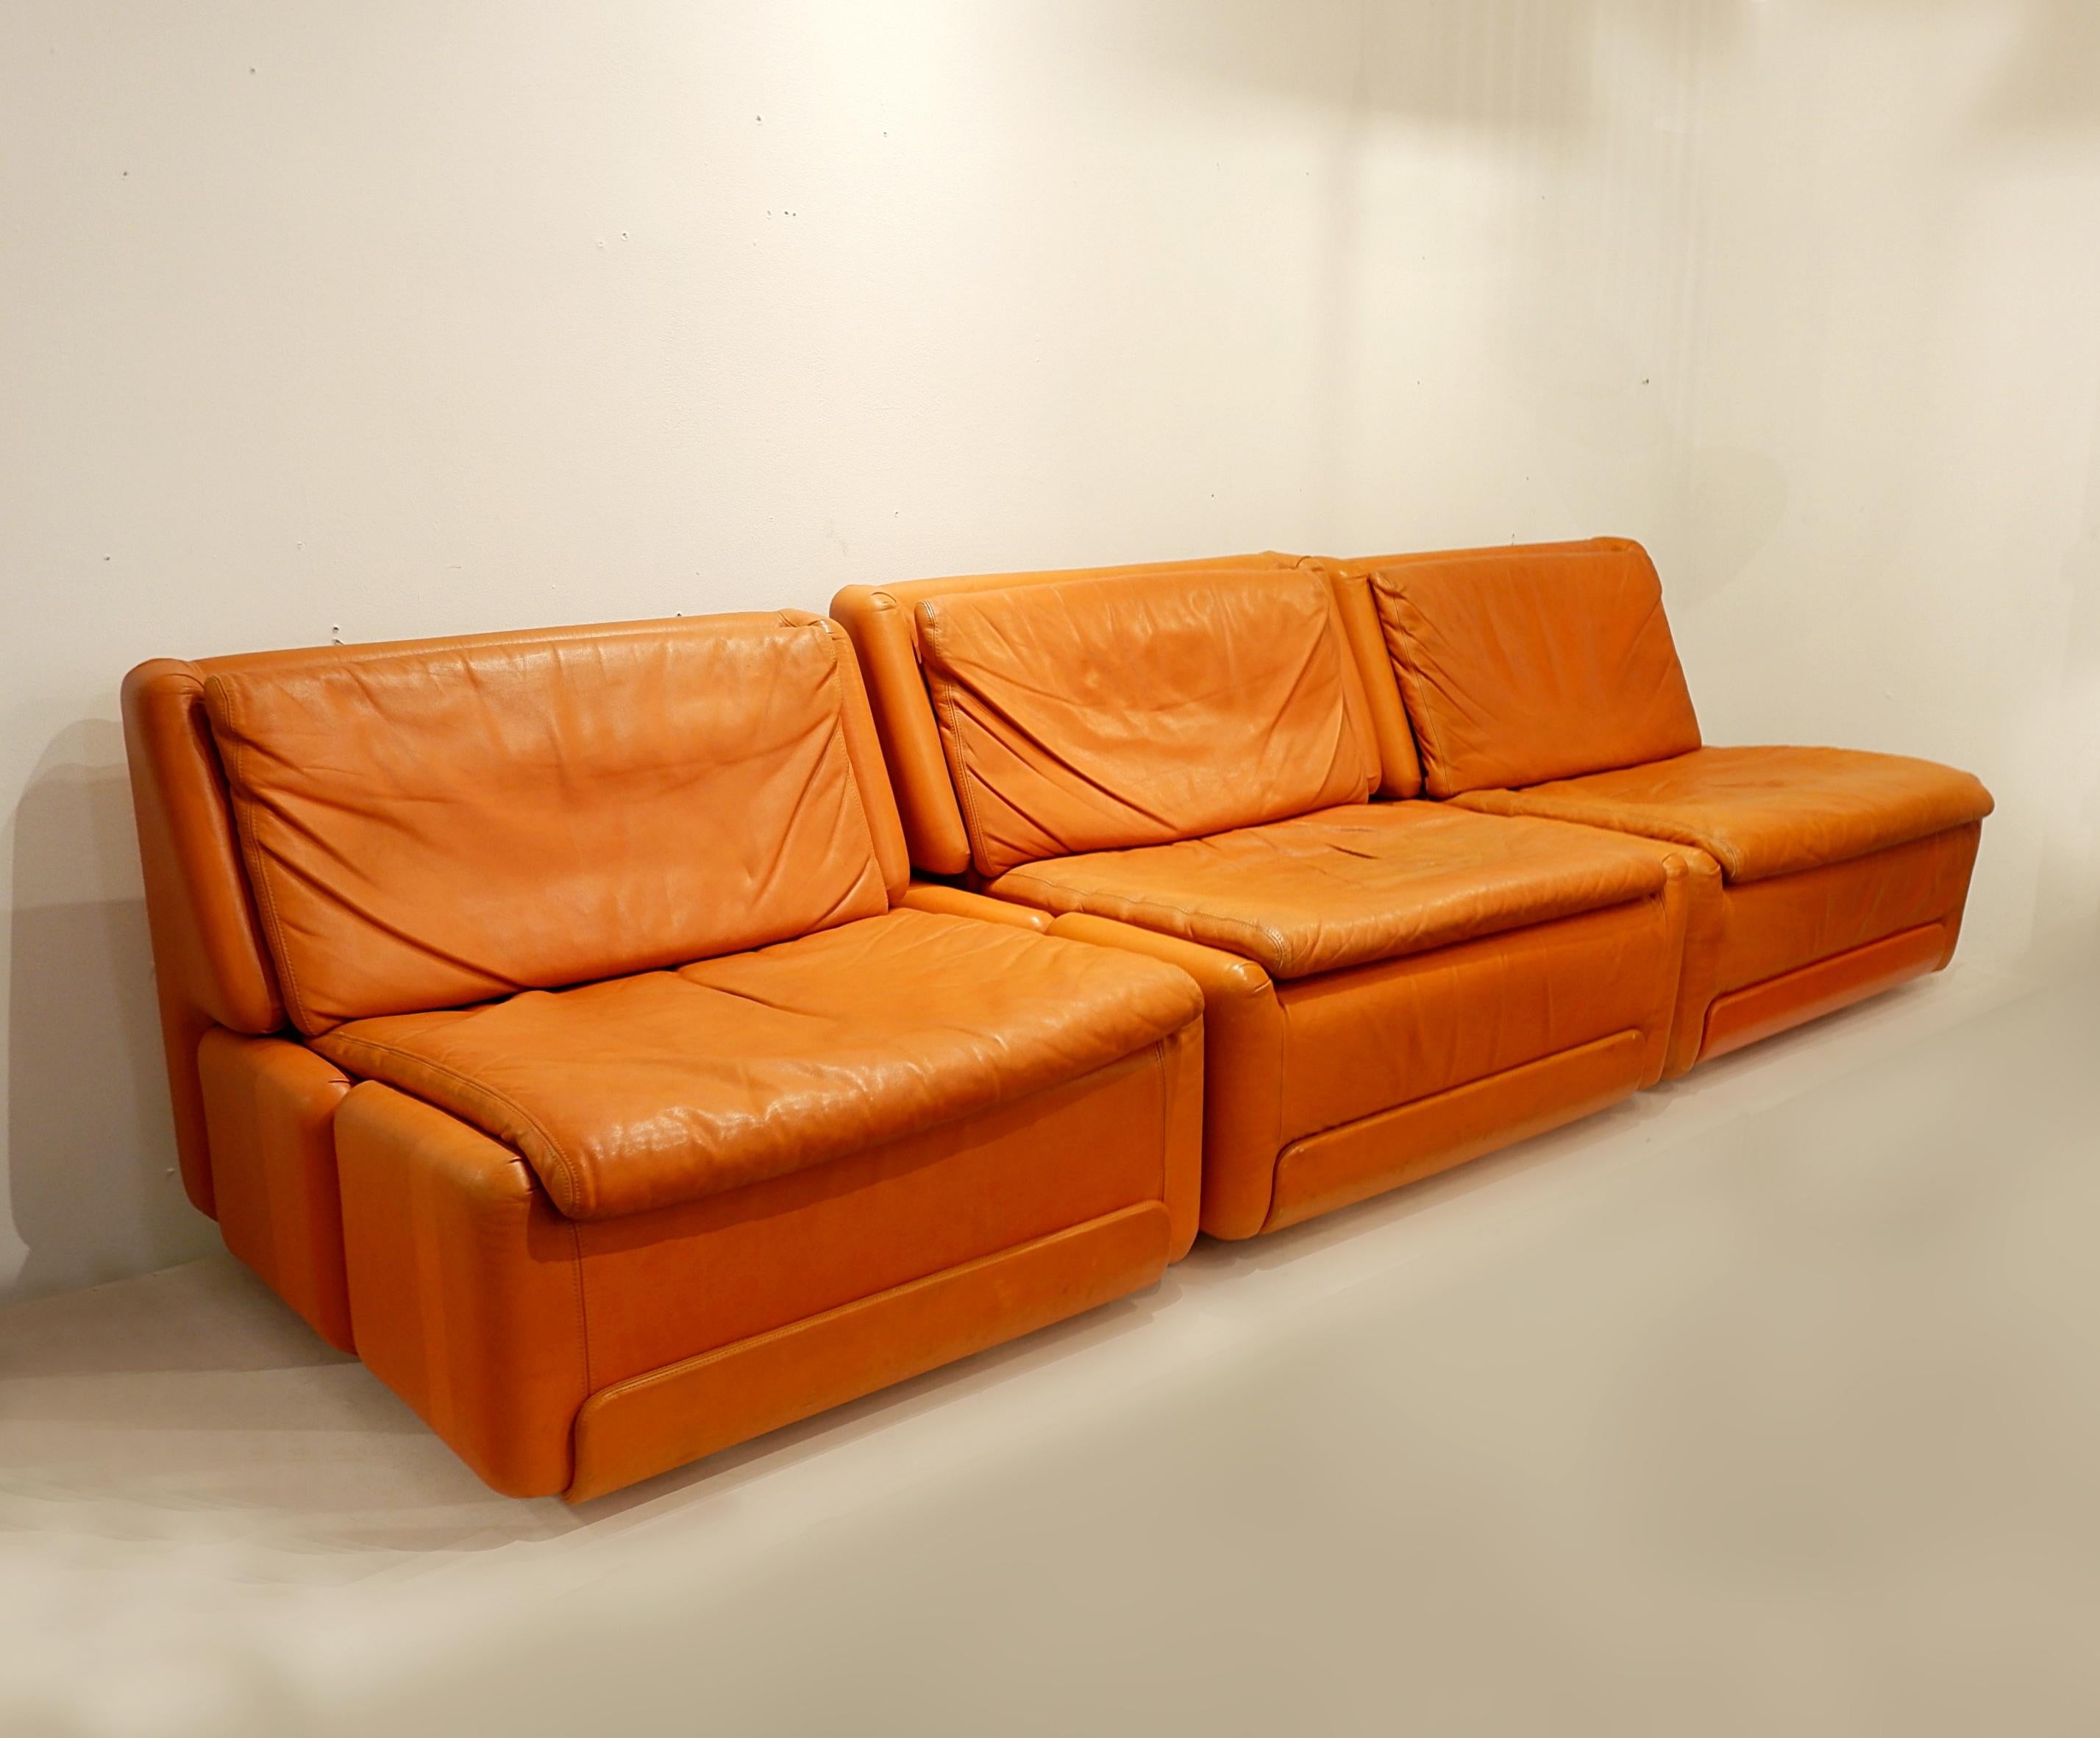 Comfortable and well designed armchairs in orange leather. These armchairs have a pleasant patina and an easy shape for most interior. They can bring a touch of colour or complement an already colourful area. There are five available.